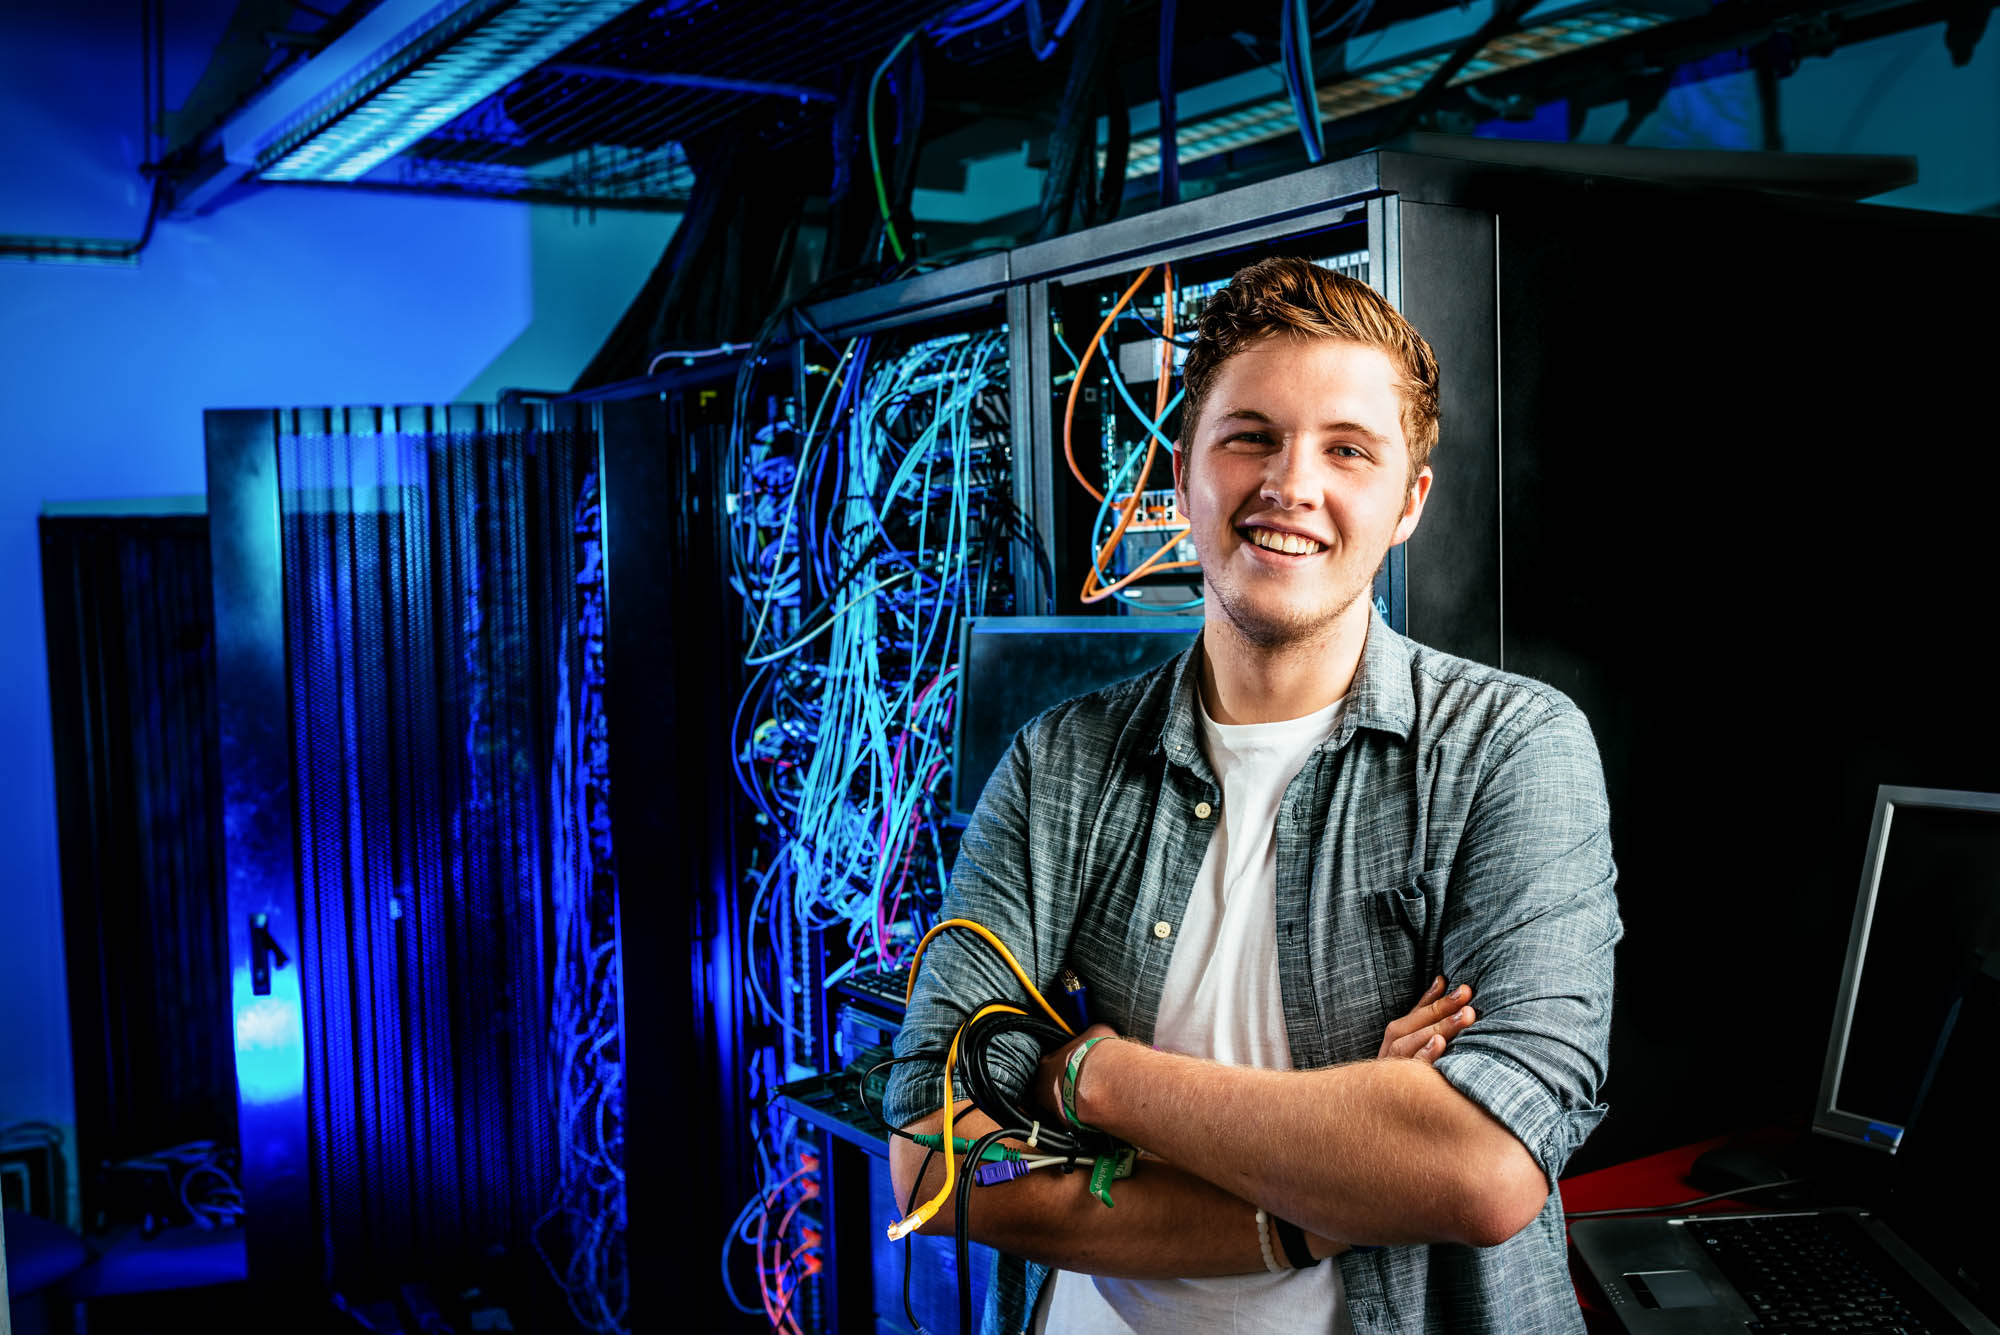 A photo of an IT student holding cables in front of a large networking cabinet